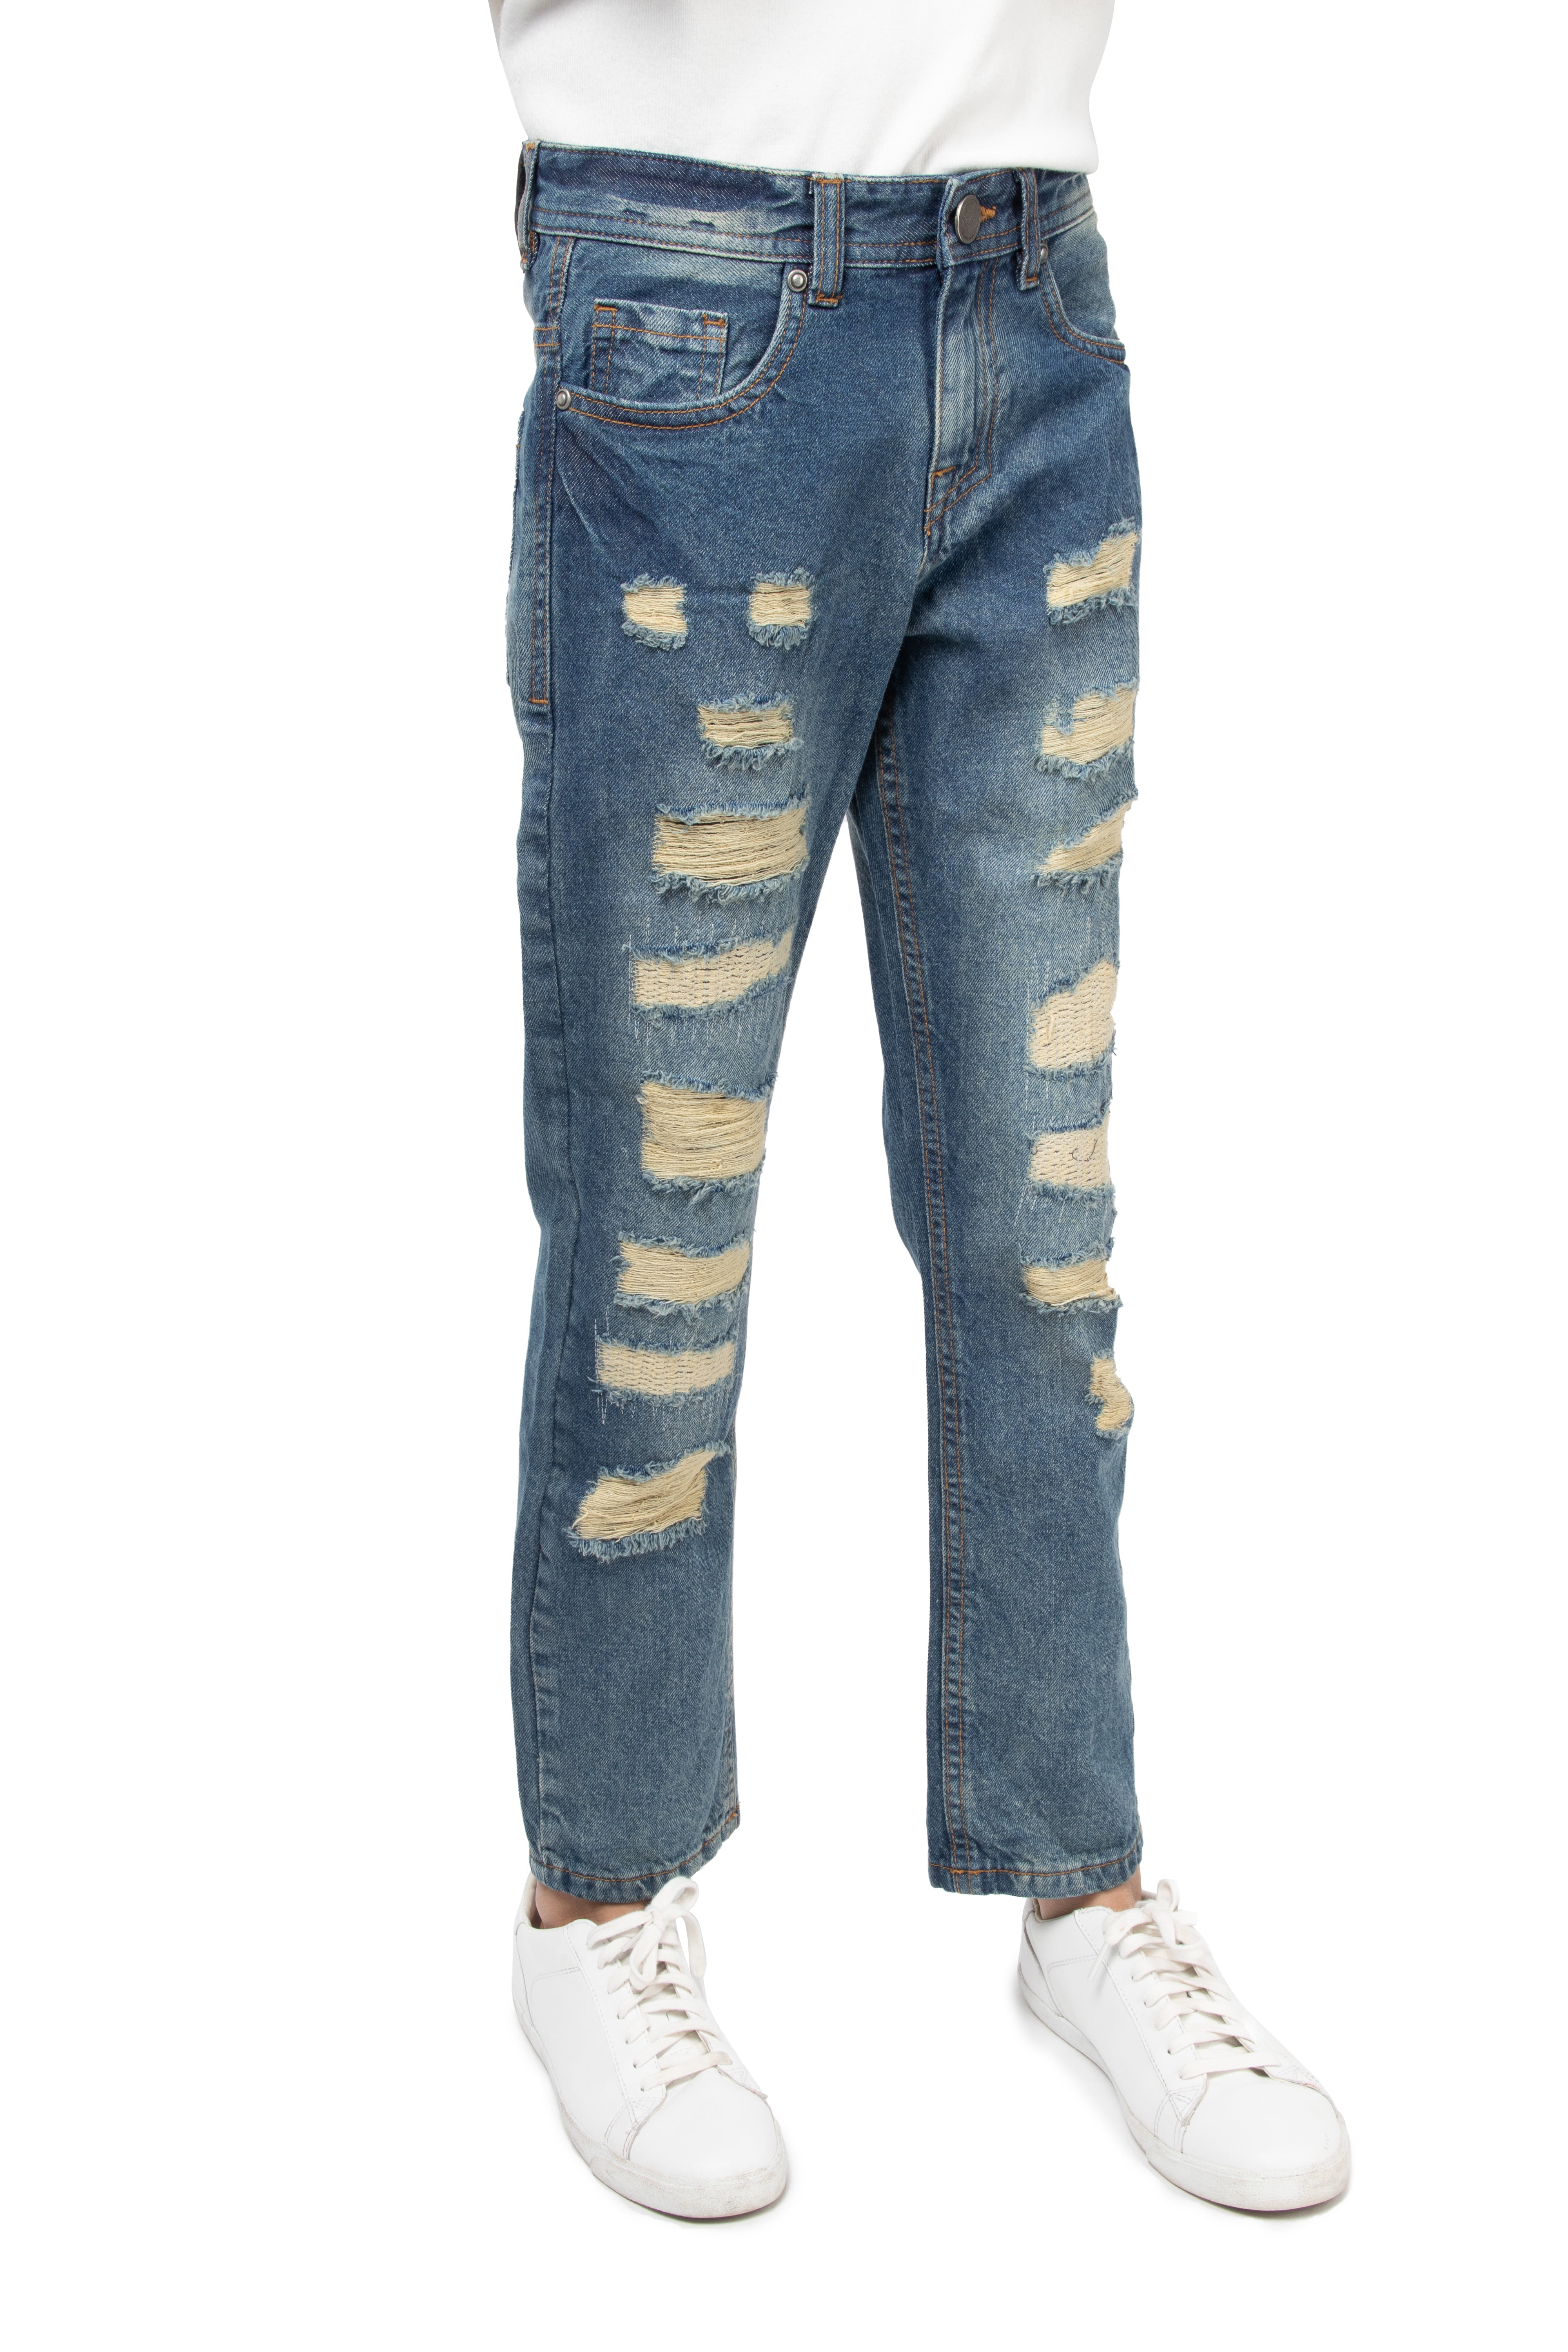 X RAY Skinny Ripped Jeans for Boys Distressed Slim Fit Denim